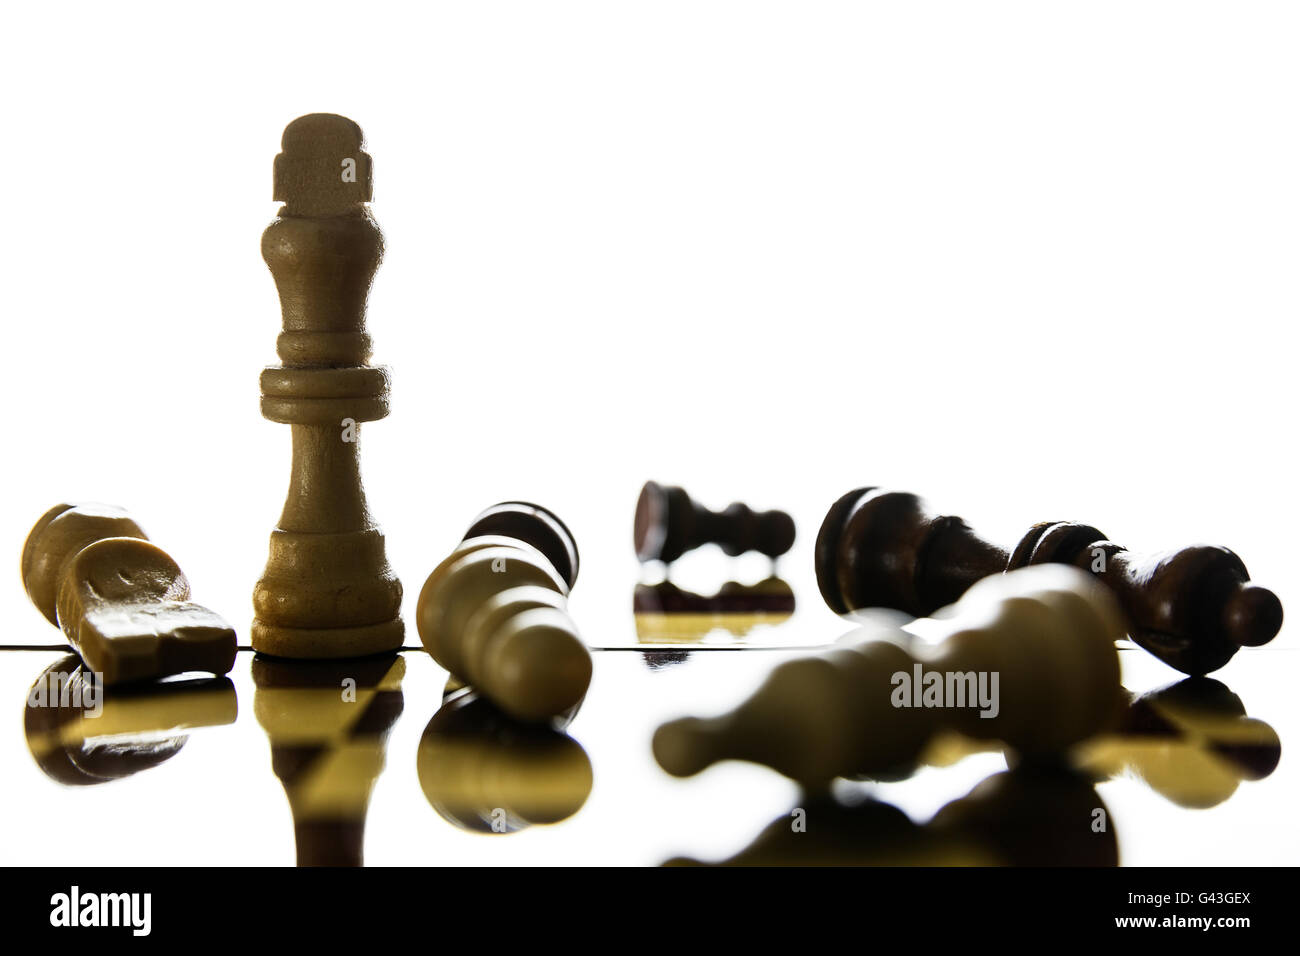 Wallpaper : chess, board game, chessboard, indoor games and sports